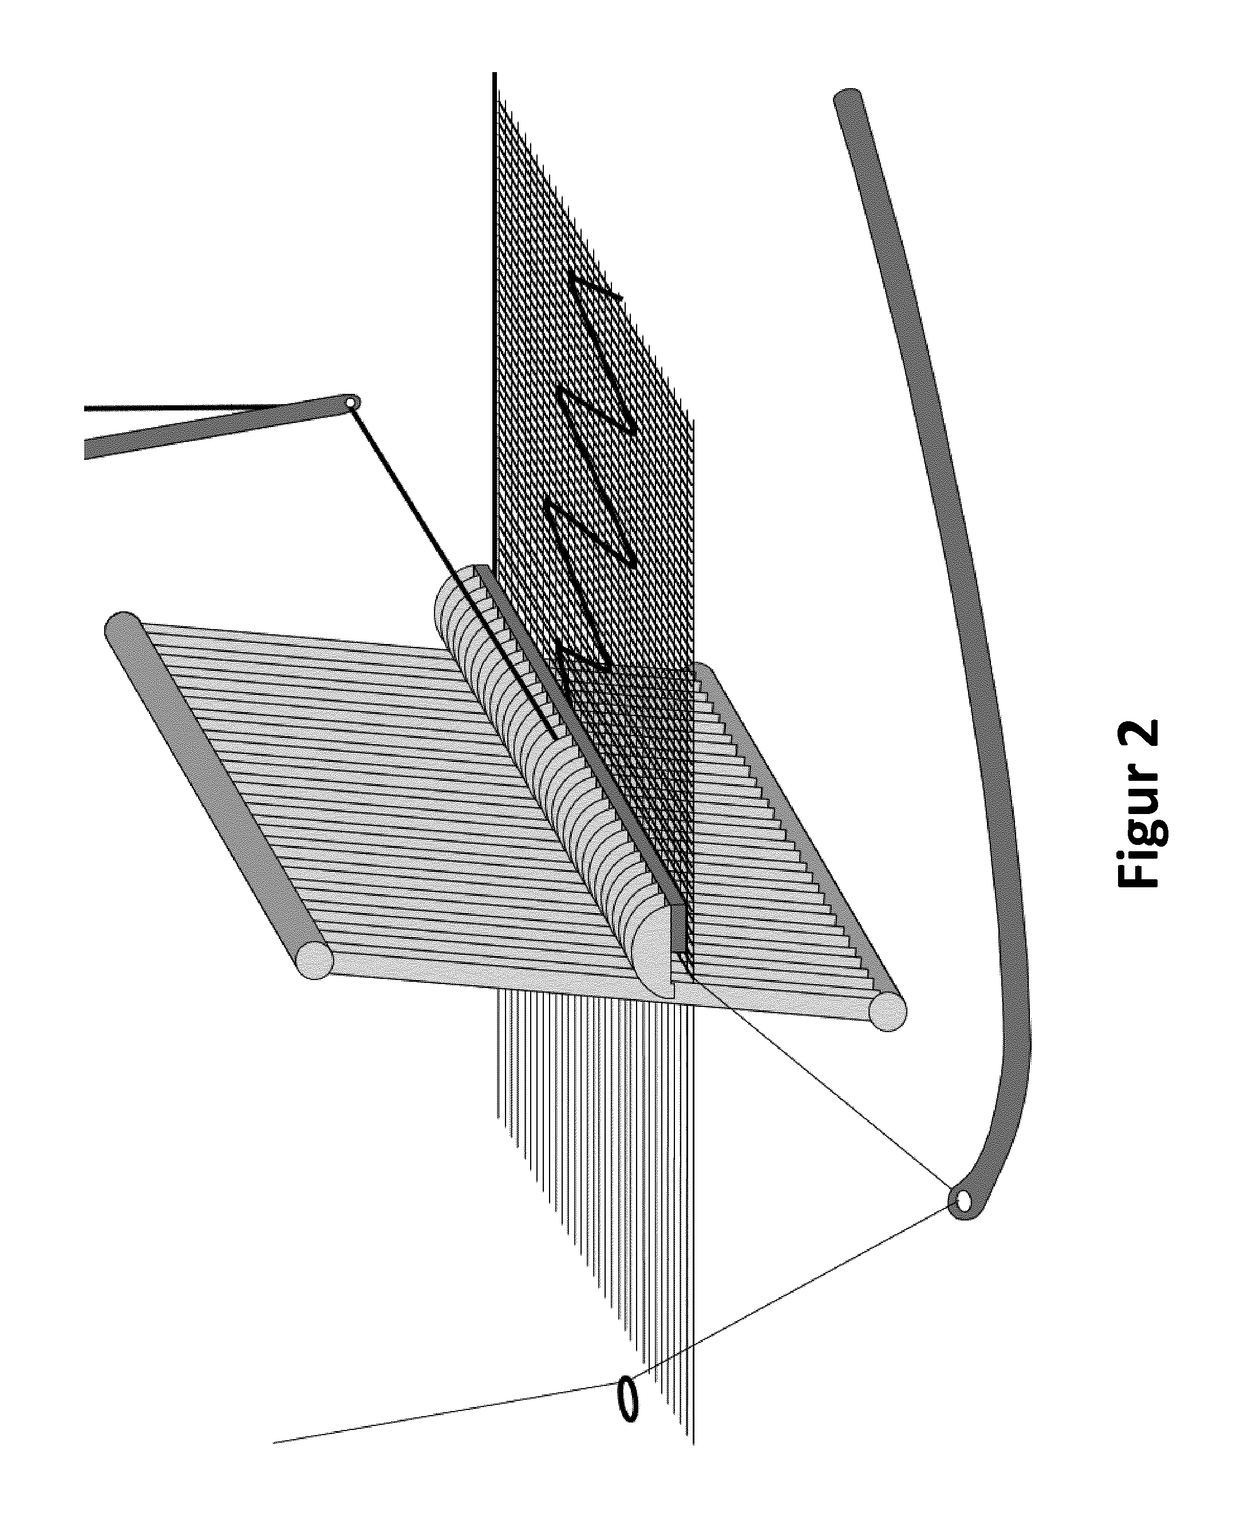 Loom for Producing Woven Material, Having Incorporated Knitting Threads or Cover Threads